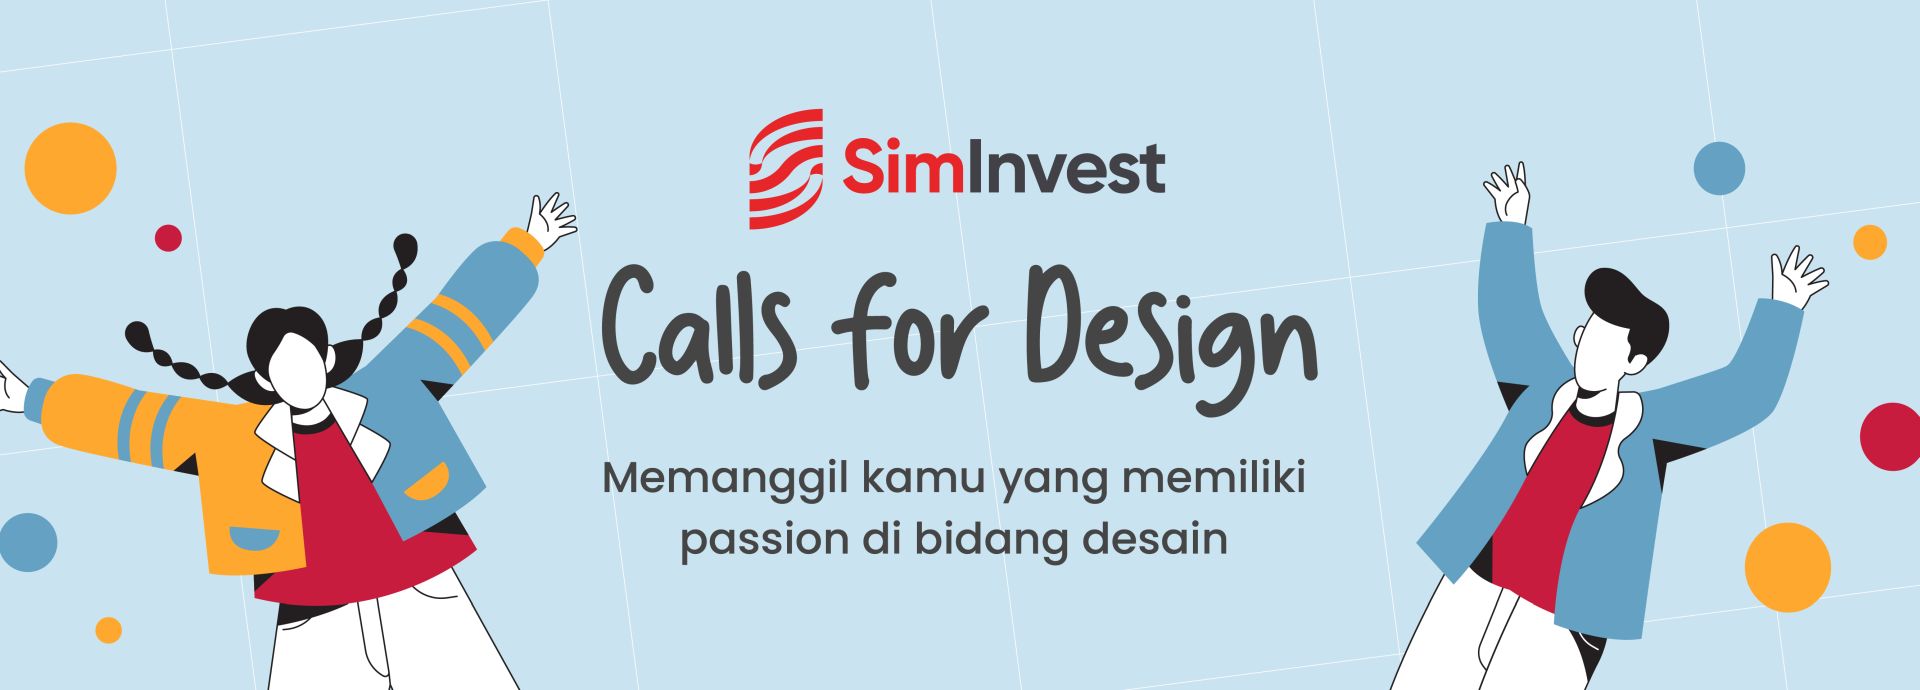 siminvest call for design